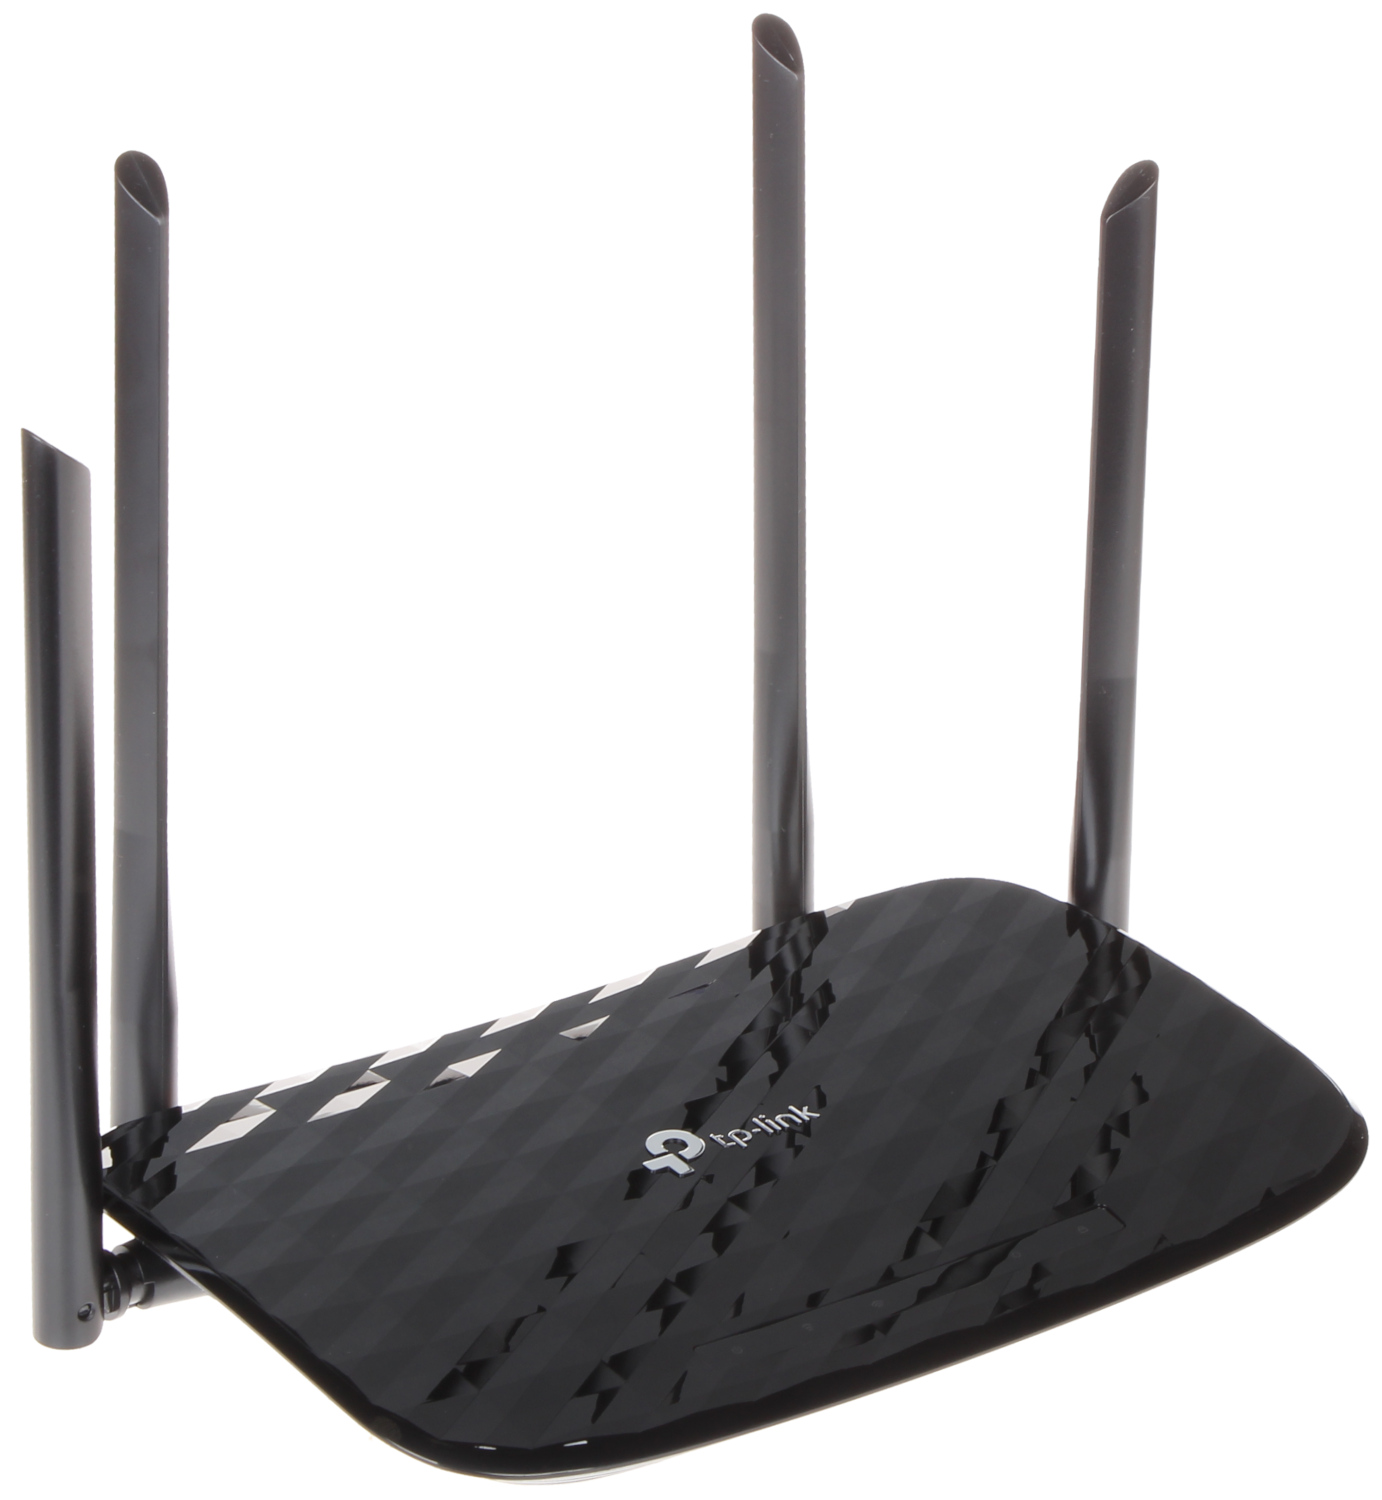 Router Tl Ec230 G1 2 4 Ghz 5 Ghz 450 Mbps 867 Mbps Routers 2 4 Ghz And 5 Ghz Access Points Delta